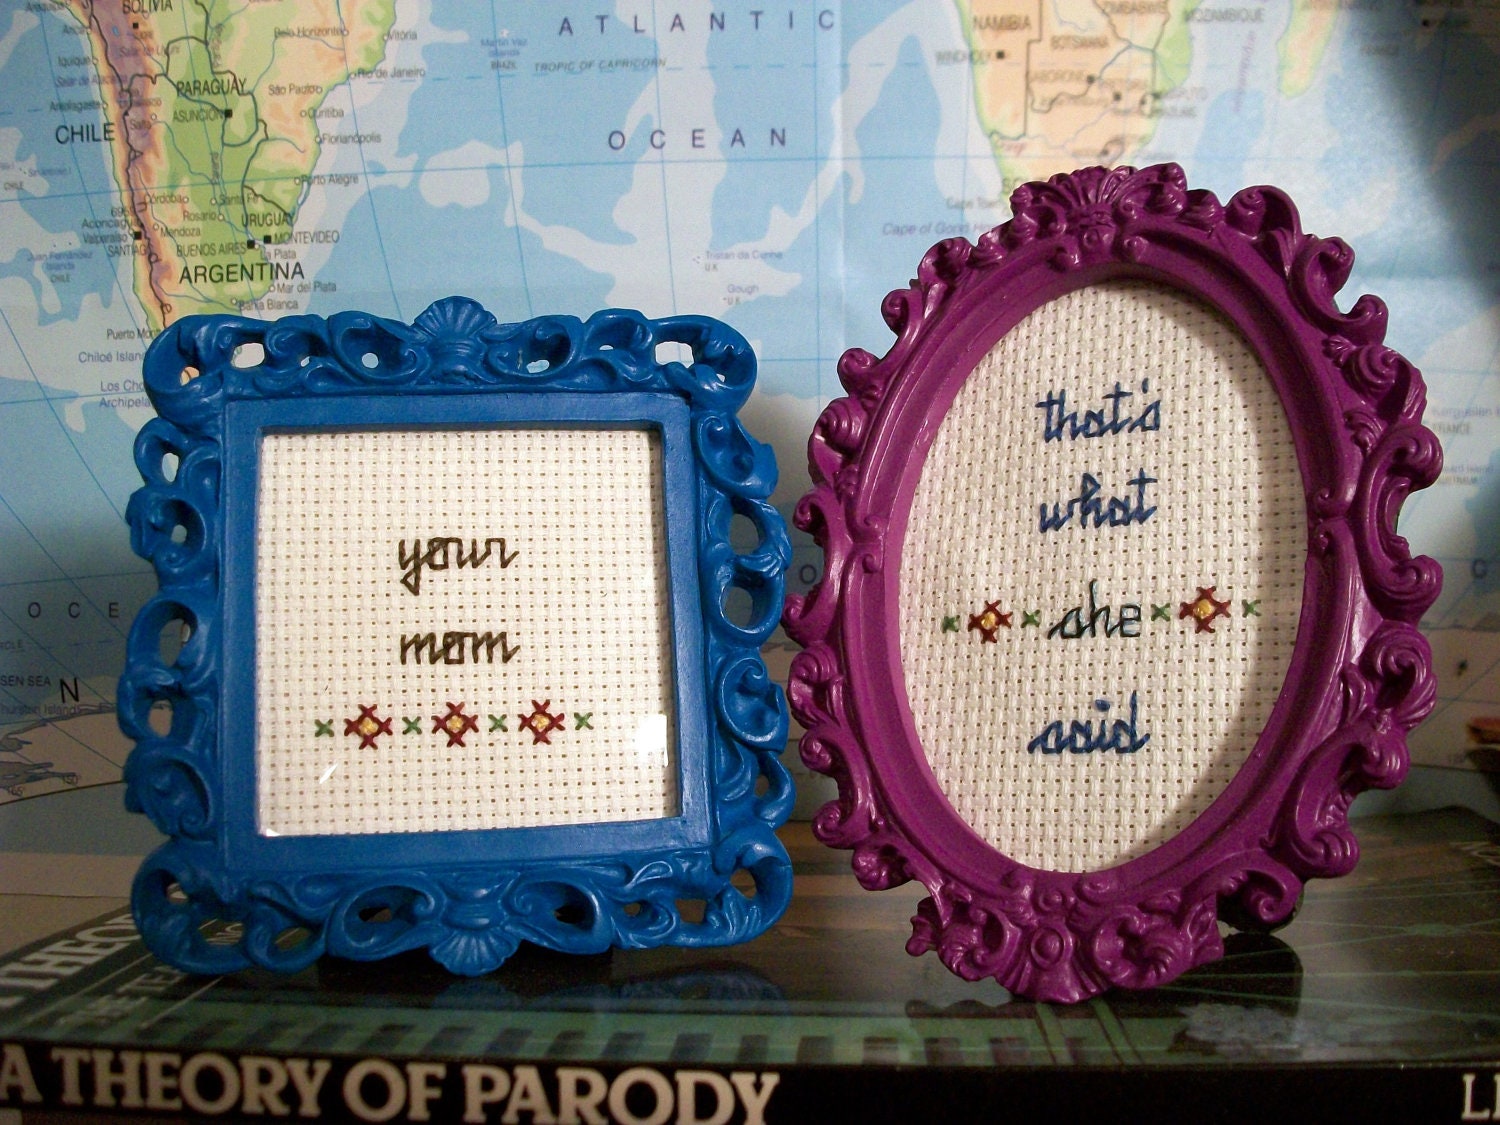 Your Mom cross stitch -- small framed cross stitch gift for escalating and winning arguments and insult wars